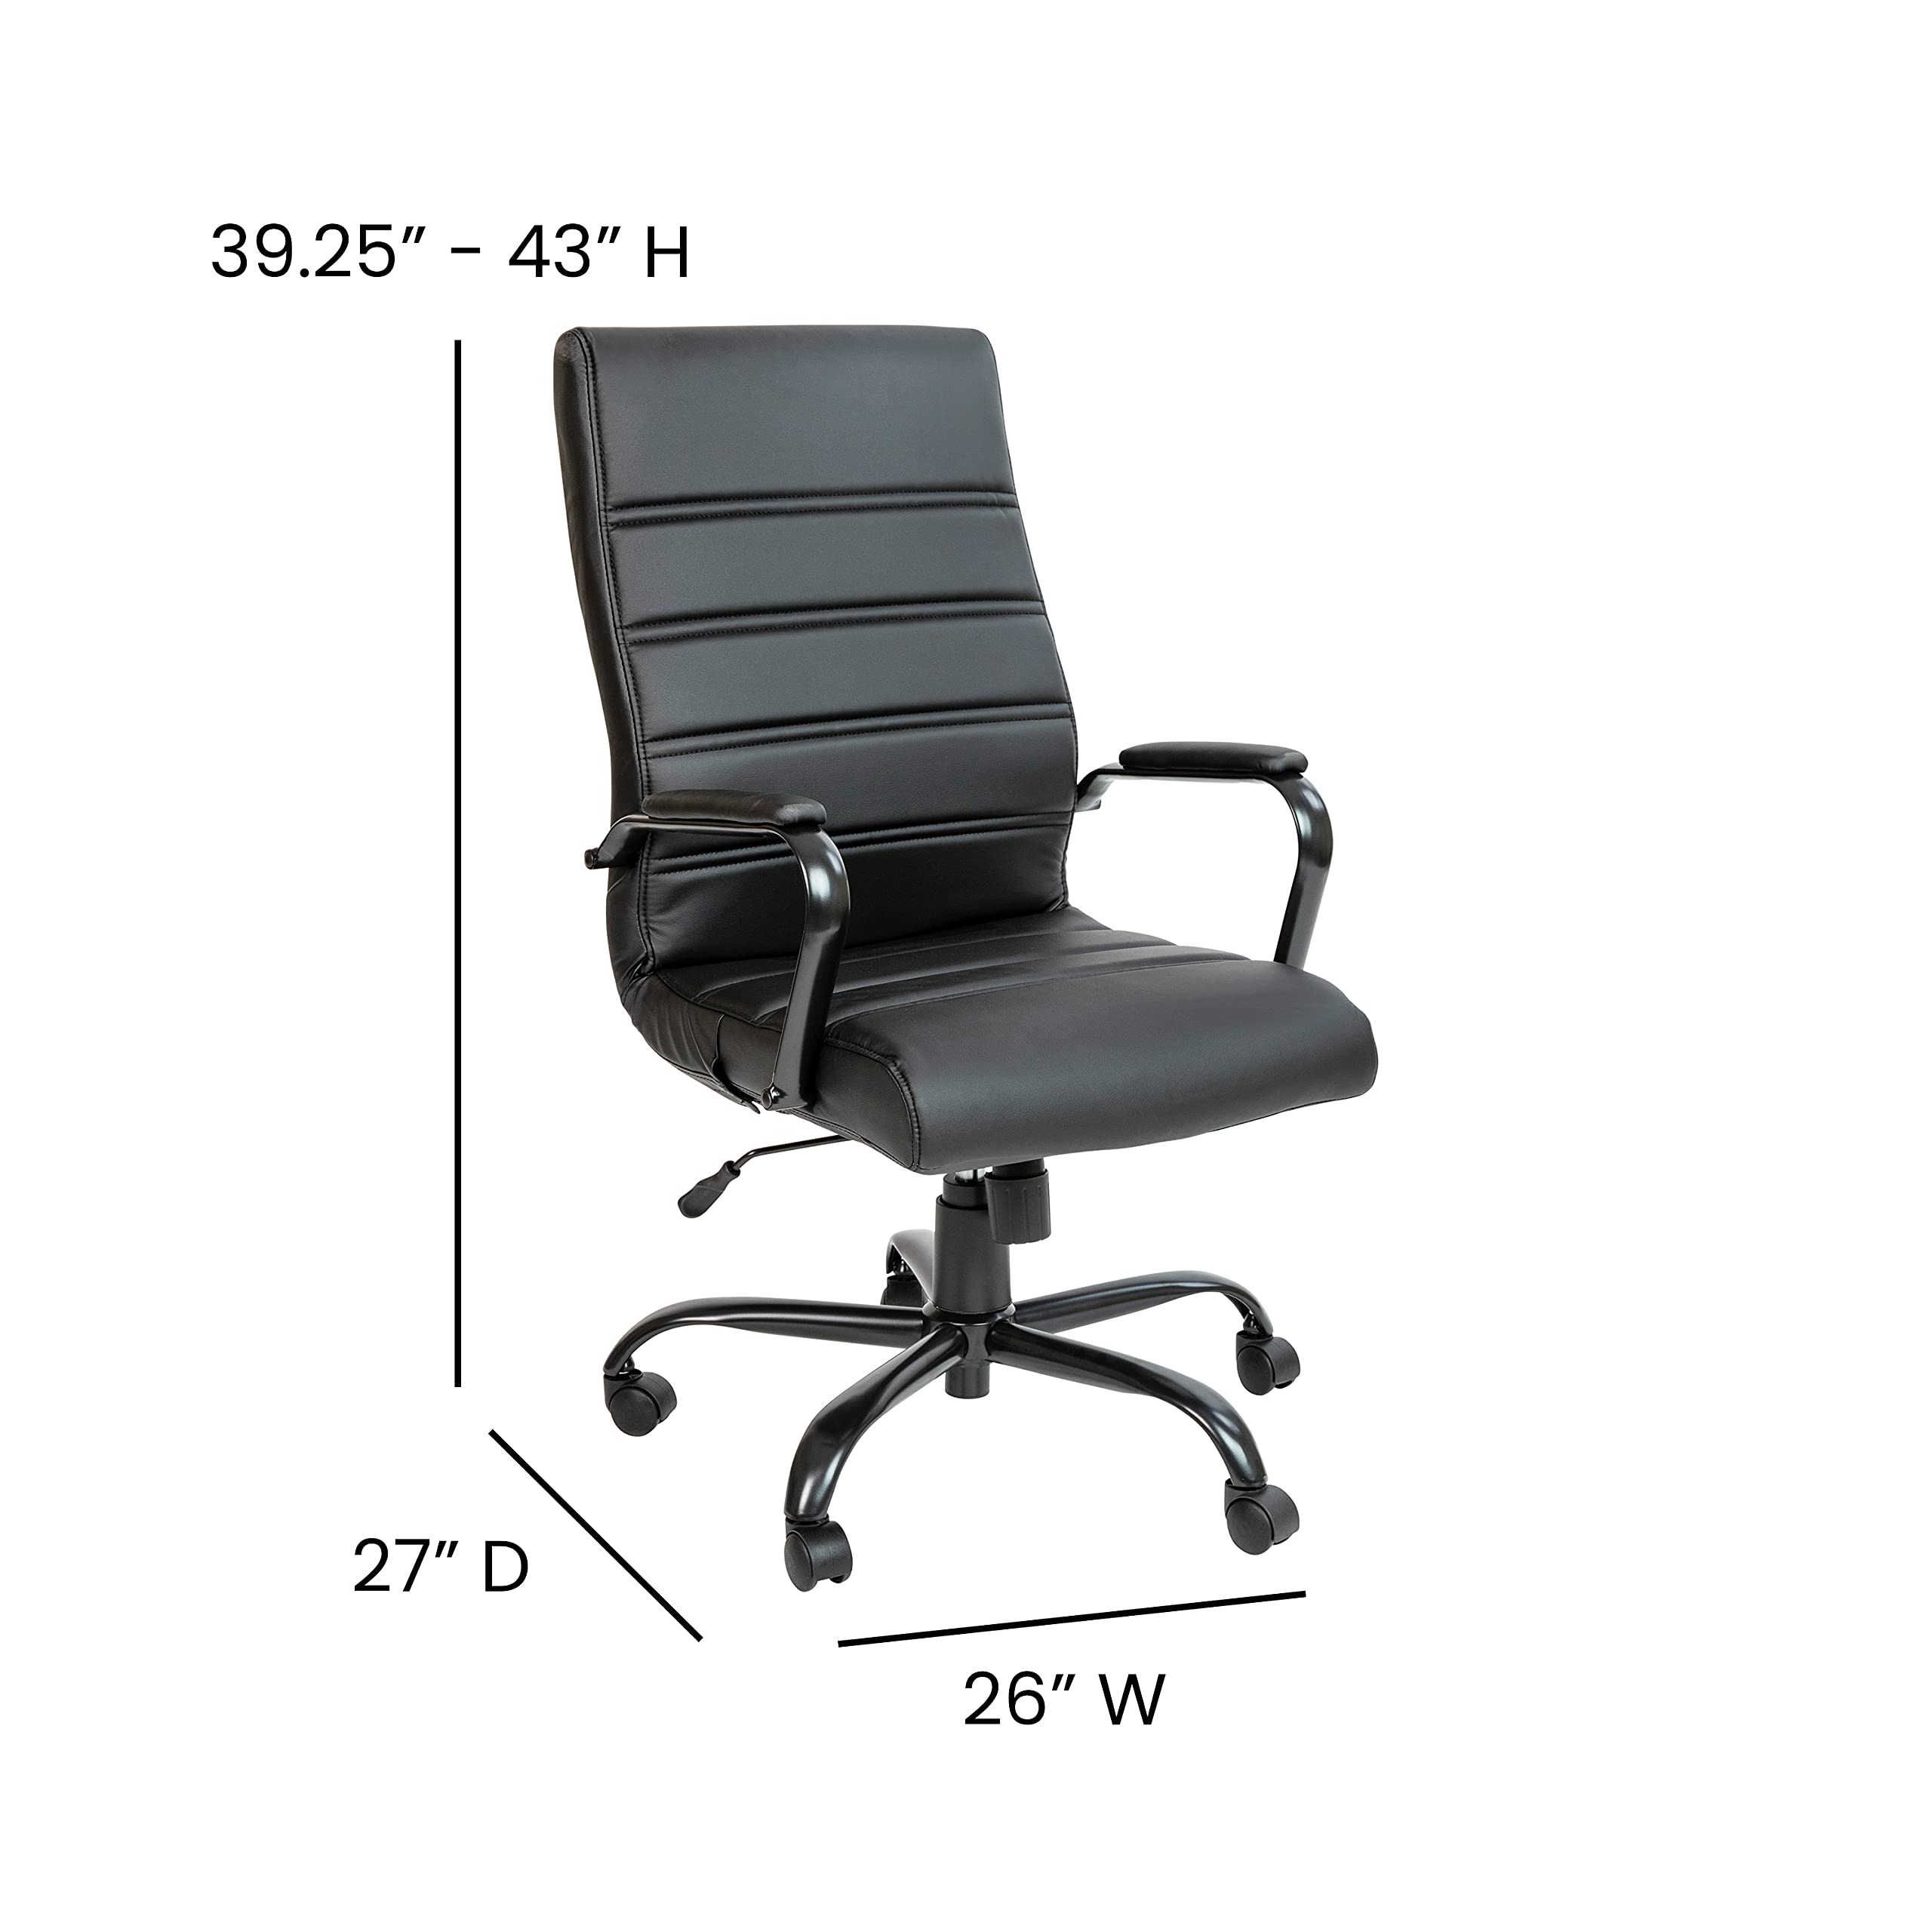 EMMA + OLIVER High Back Black LeatherSoft Executive Swivel Office Chair with Black Frame/Arms